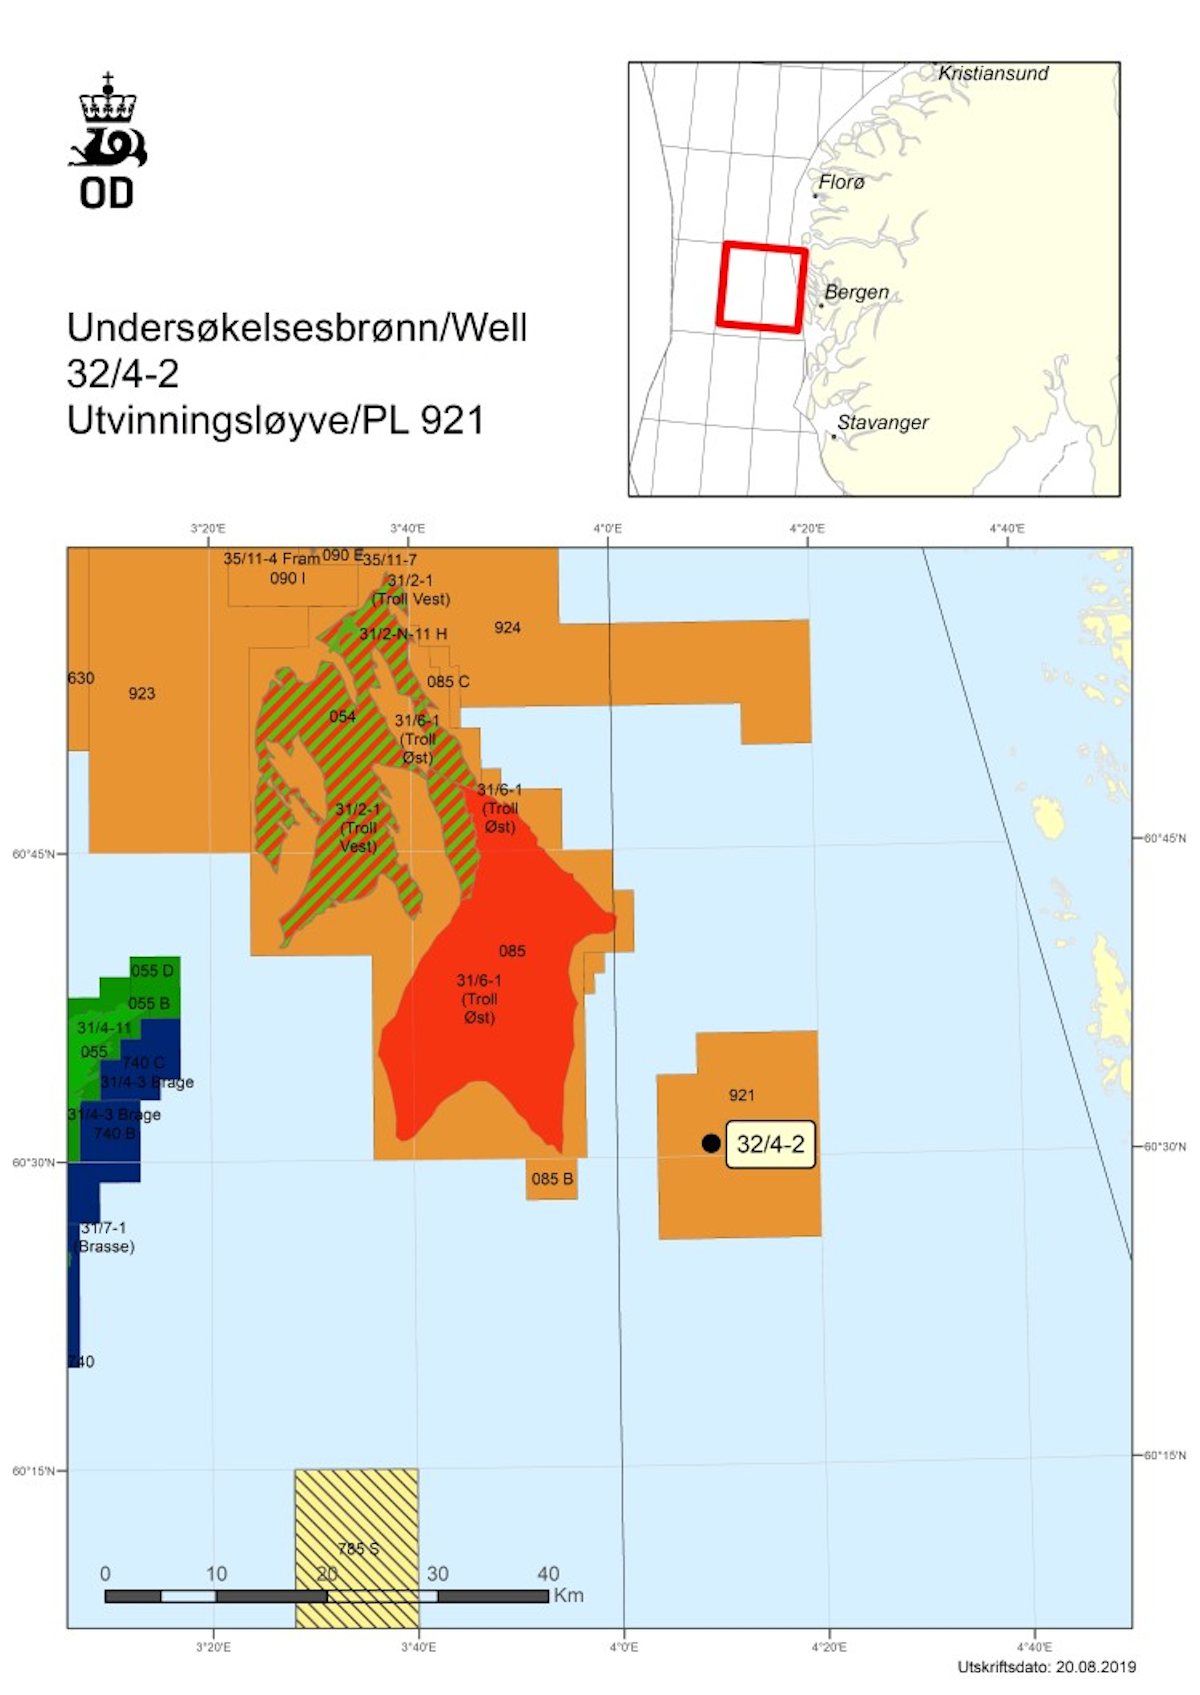 Equinor to drill untested area south of North Sea Troll field | Offshore